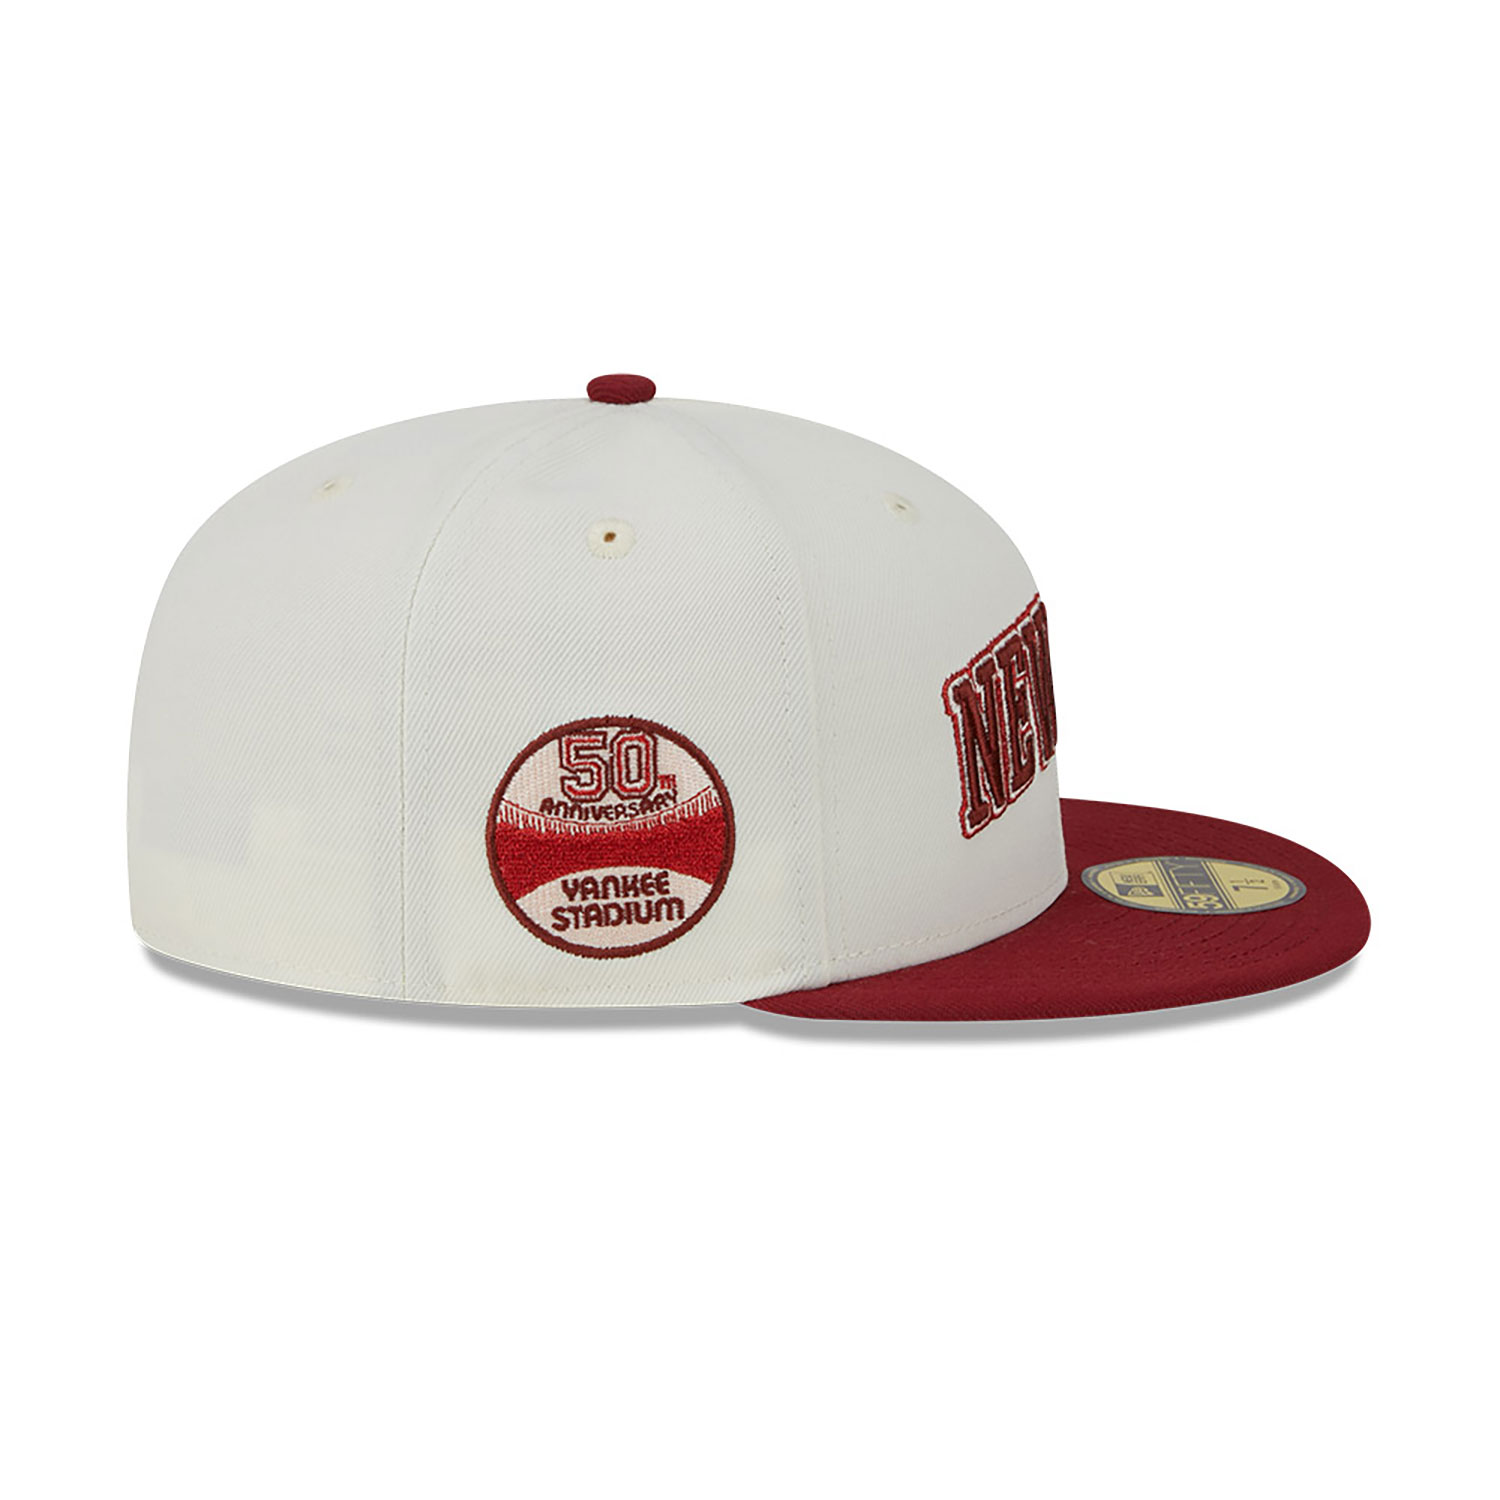 New York Yankees Be Mine White 59FIFTY Fitted Cap